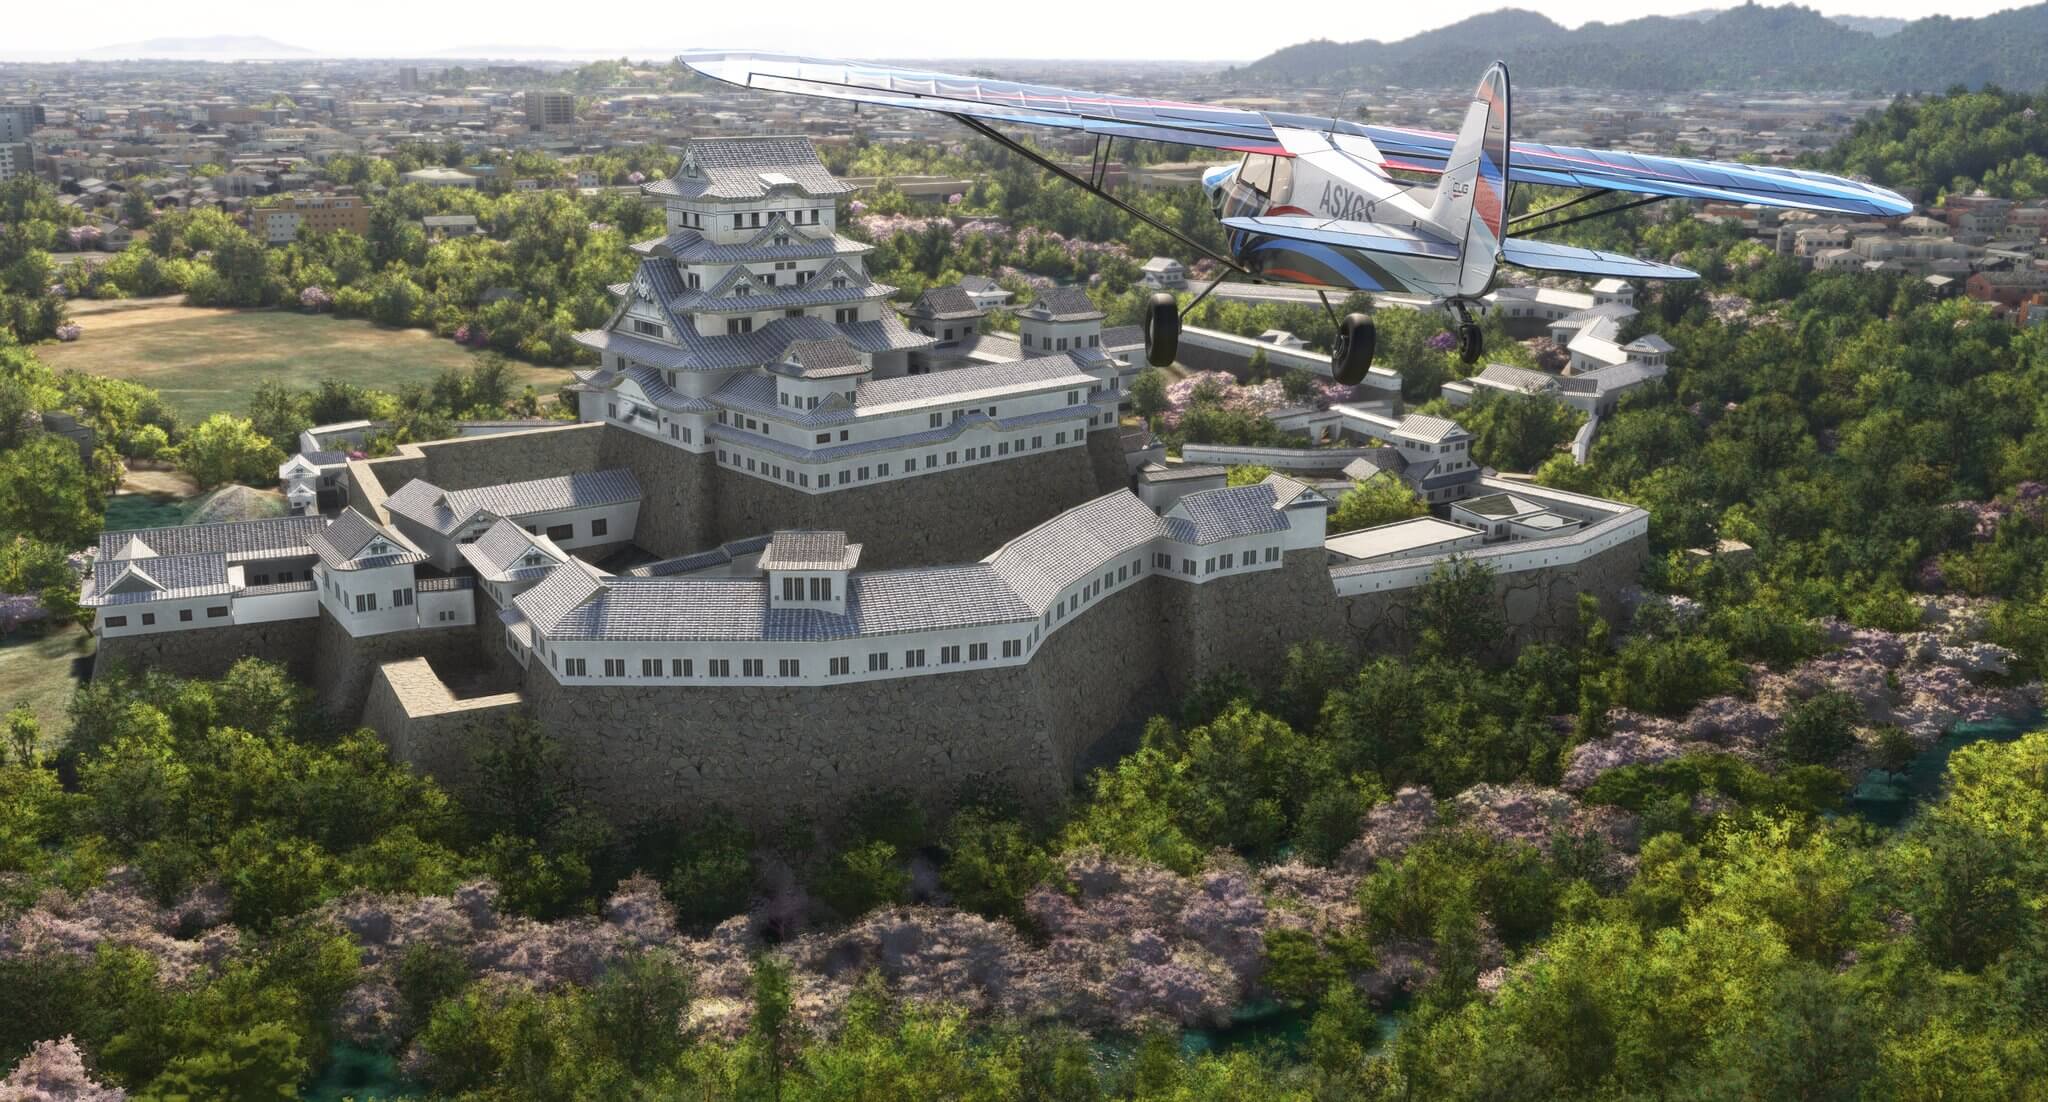 A Cub propeller aircraft flies near a castle with different colored trees and shrubbery below.